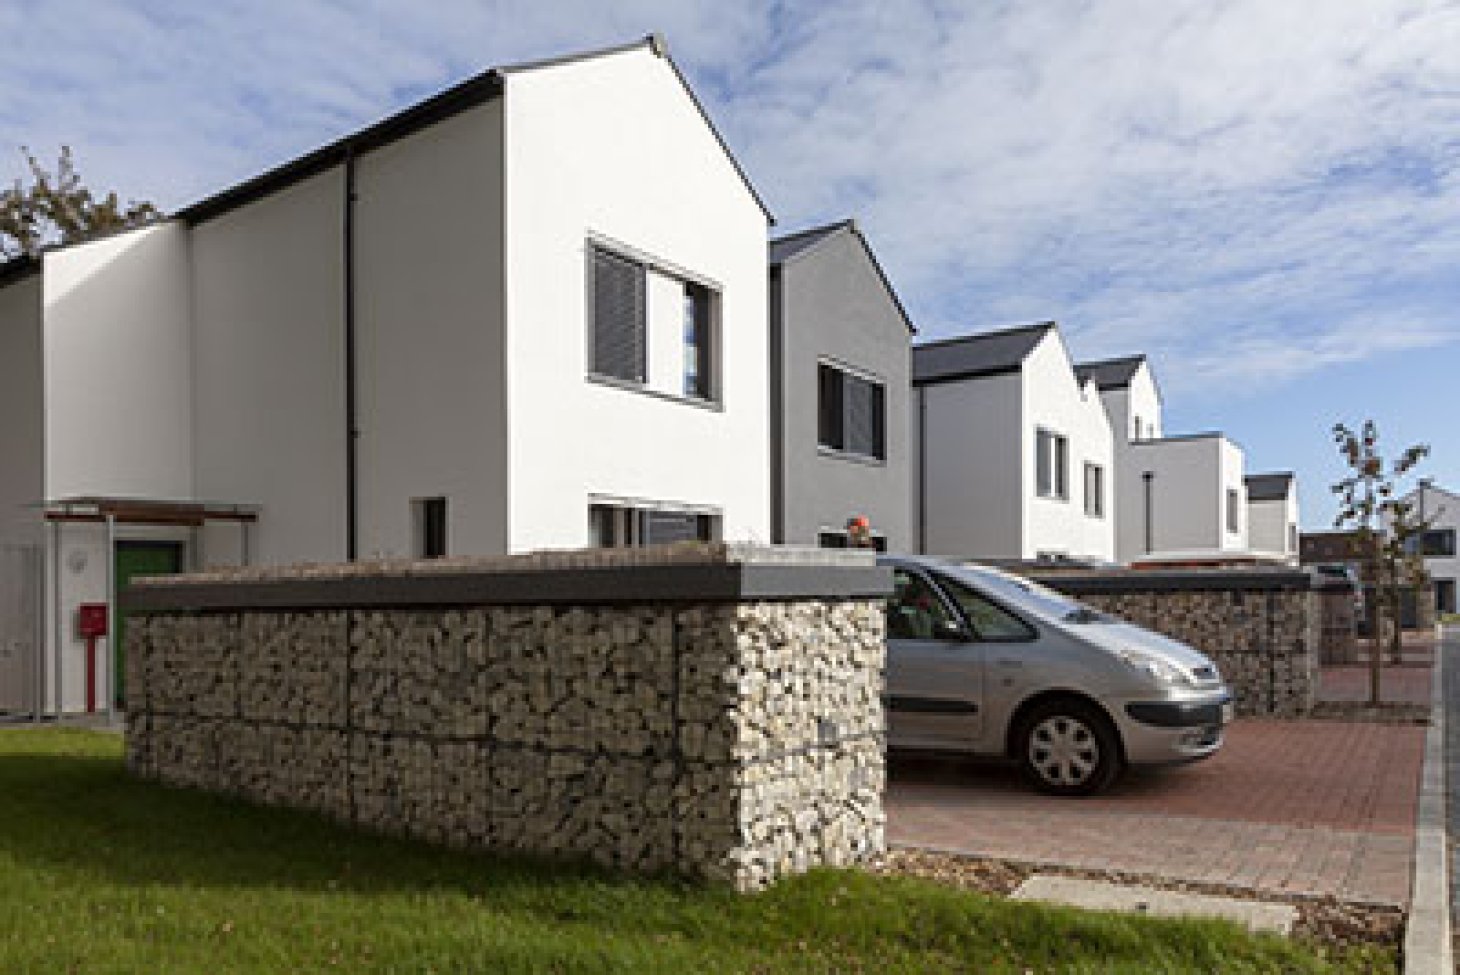 Aircrete Passivhaus shortlisted in Building Performance Awards